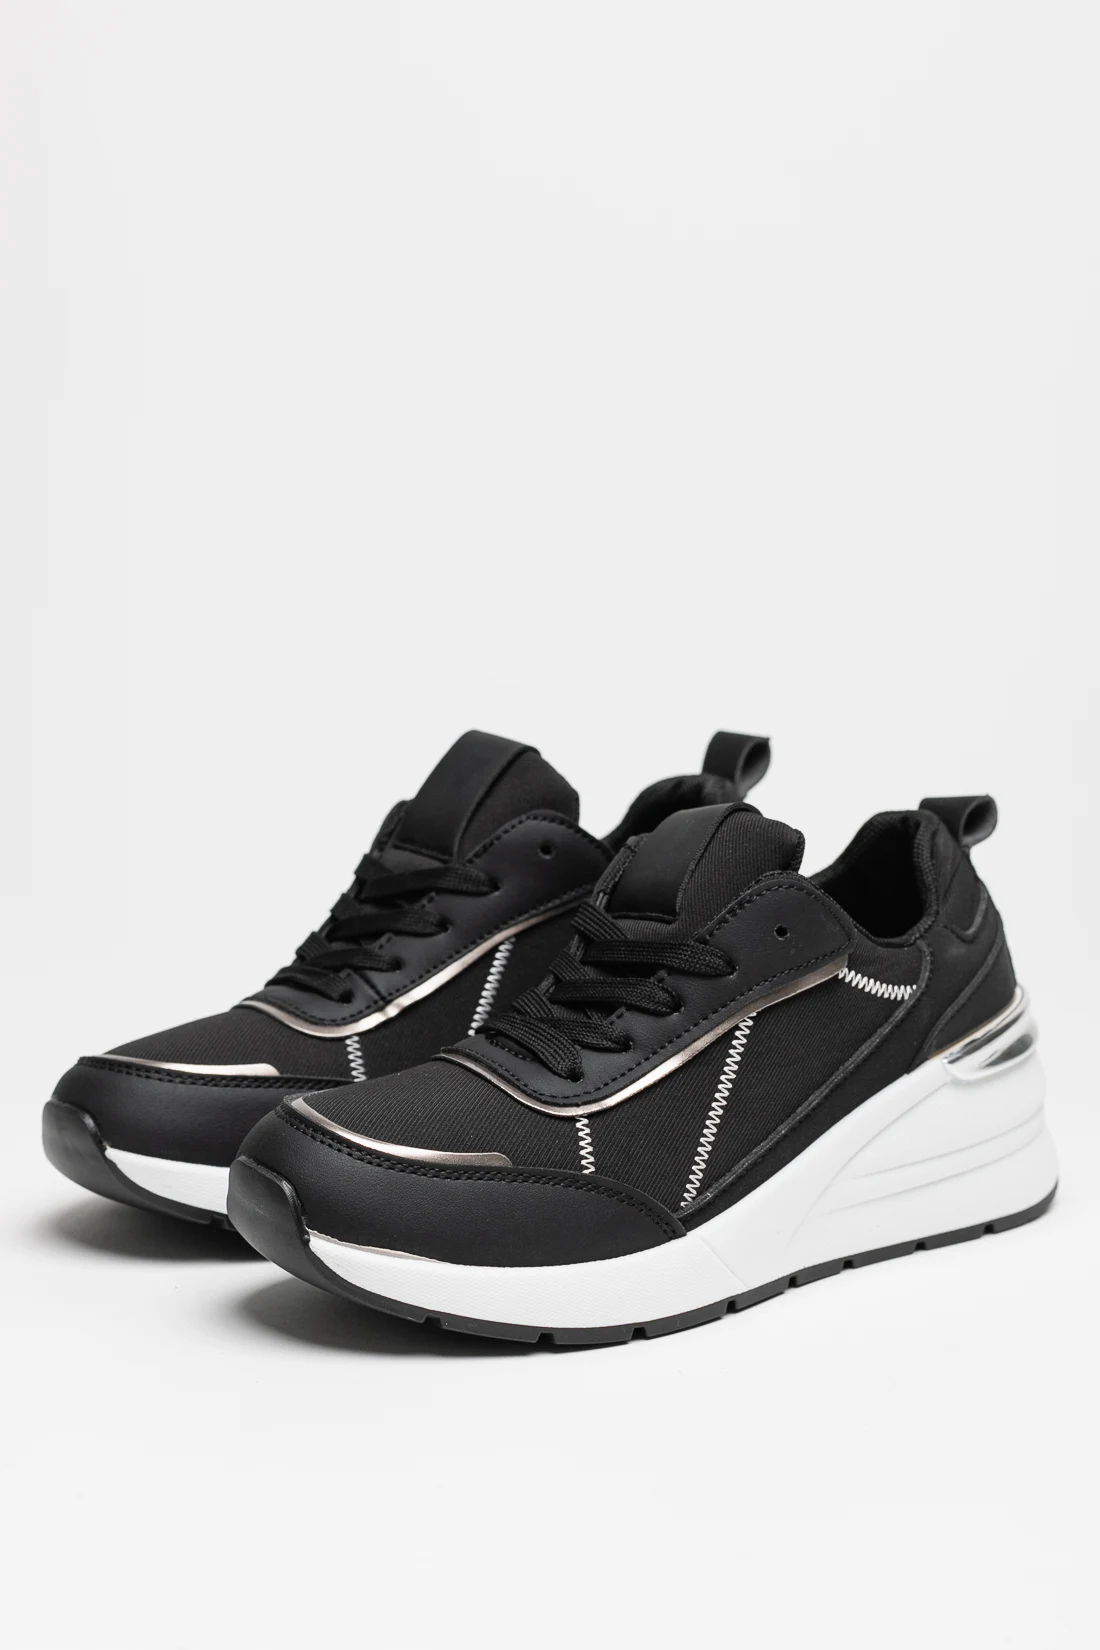 SNEAKERS CASUAL NIDOR - NERE